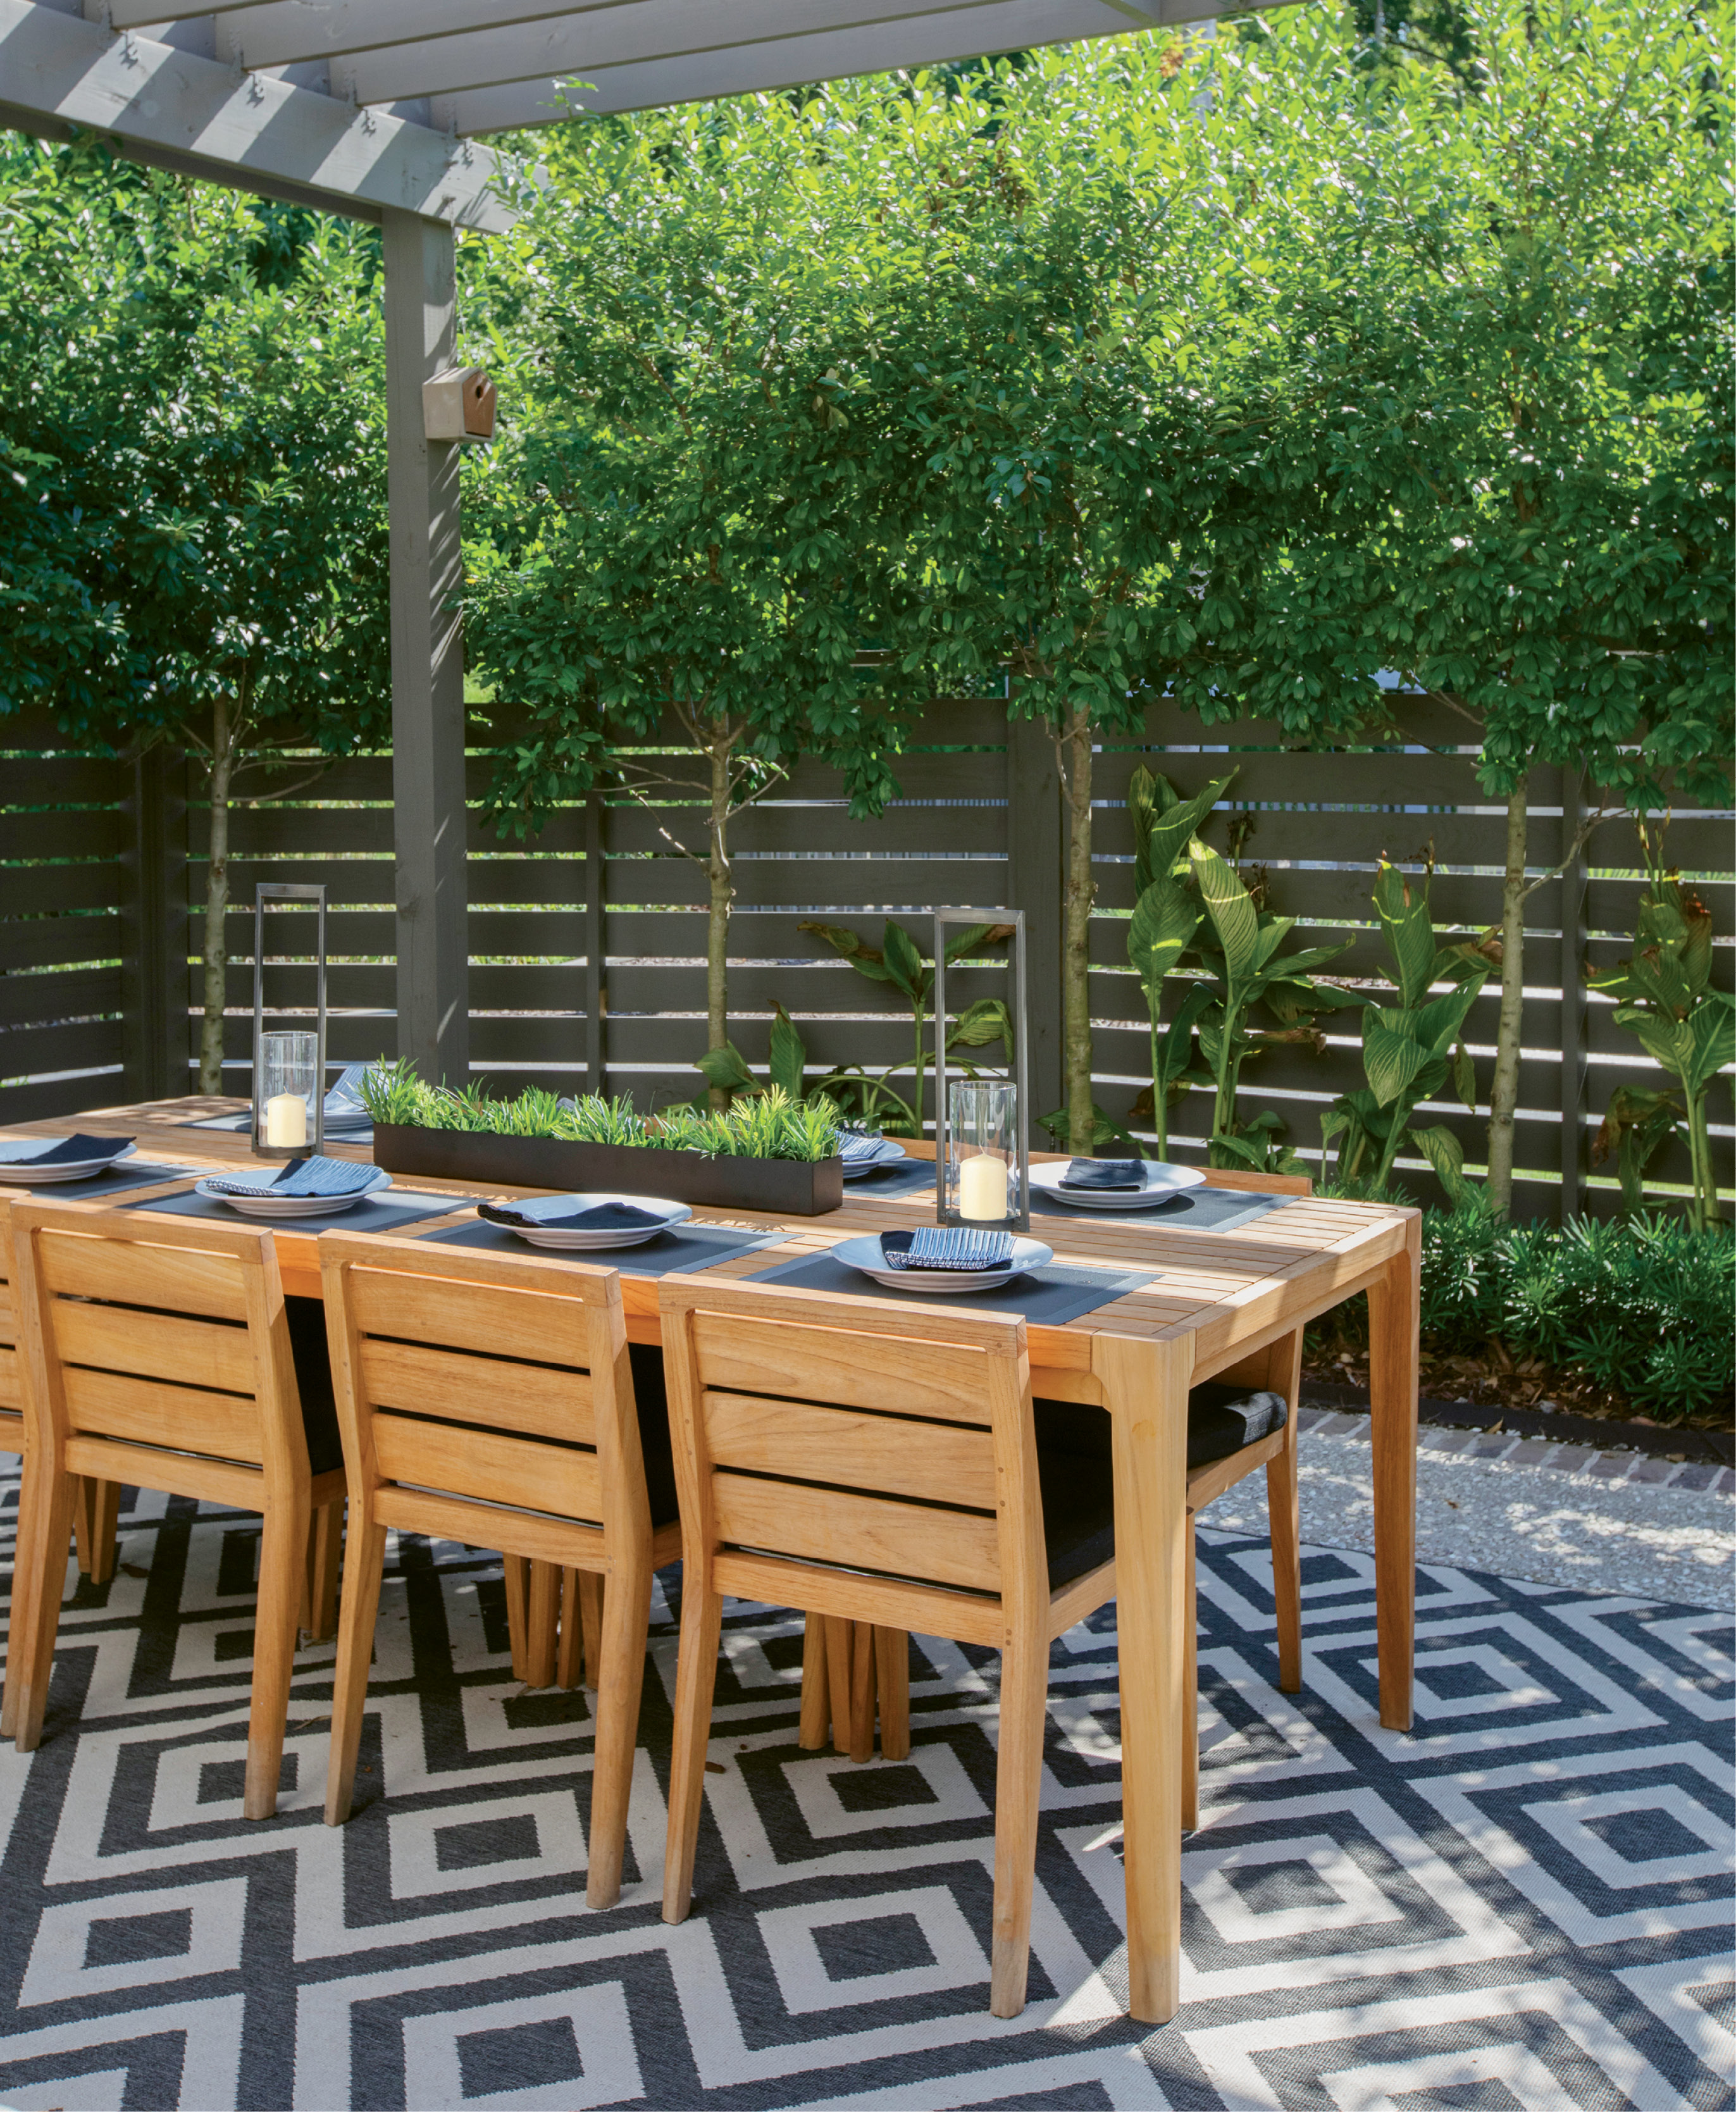 Limbed holly bushes soften a horizontal wood-slat fence, providing privacy as well as filtered light for the Thomae family’s alfresco dining room.